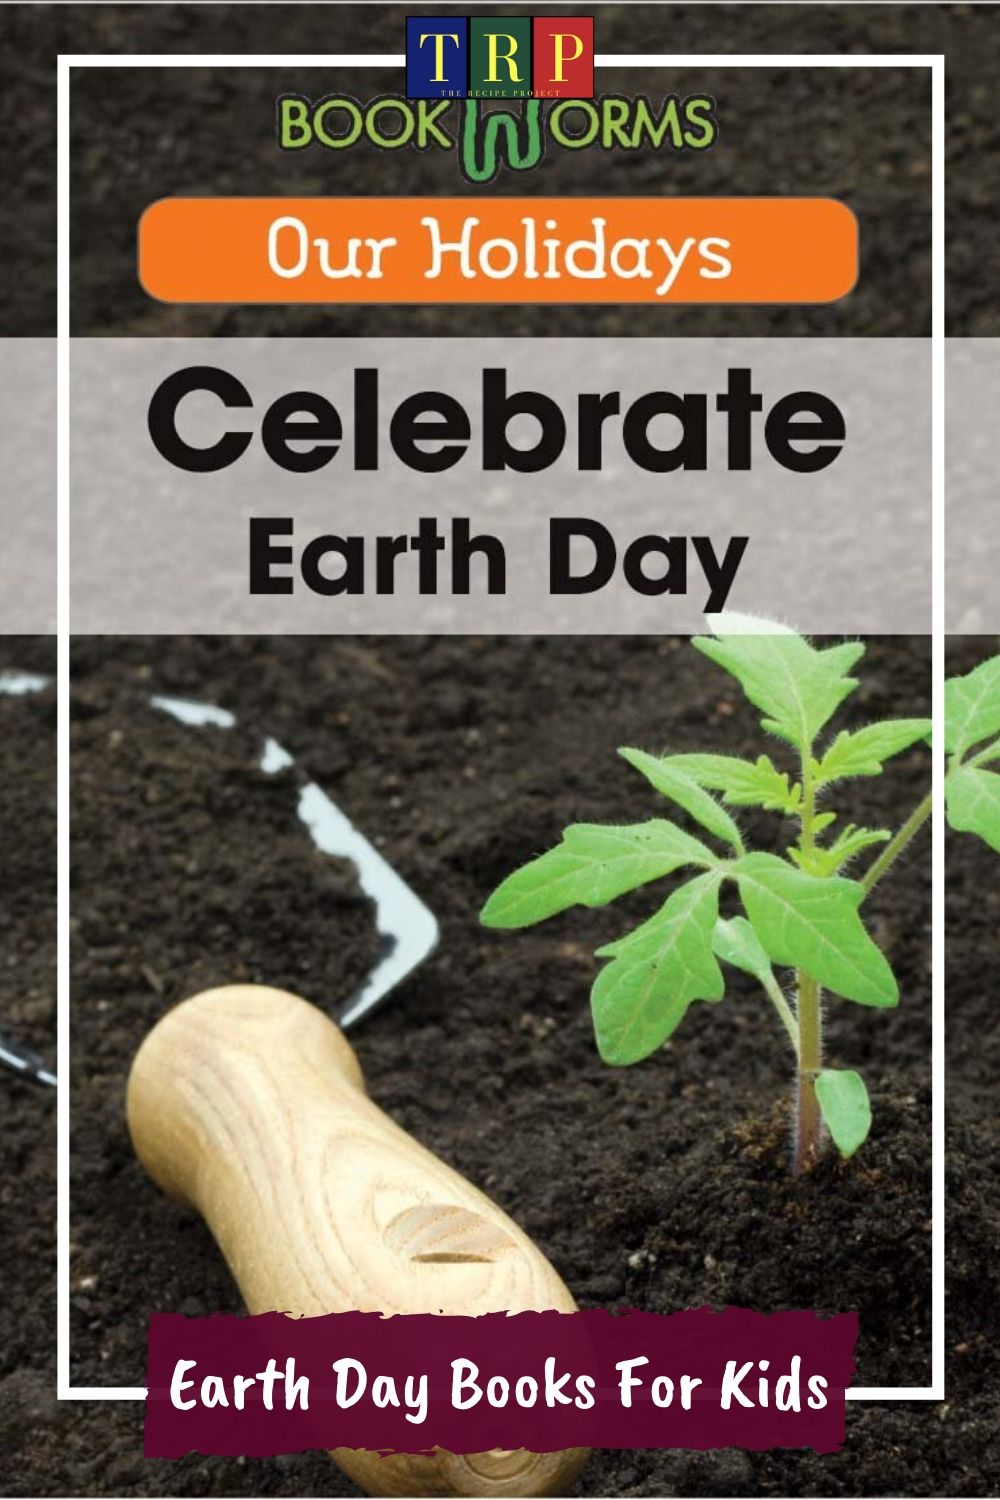 history of earth day for kids